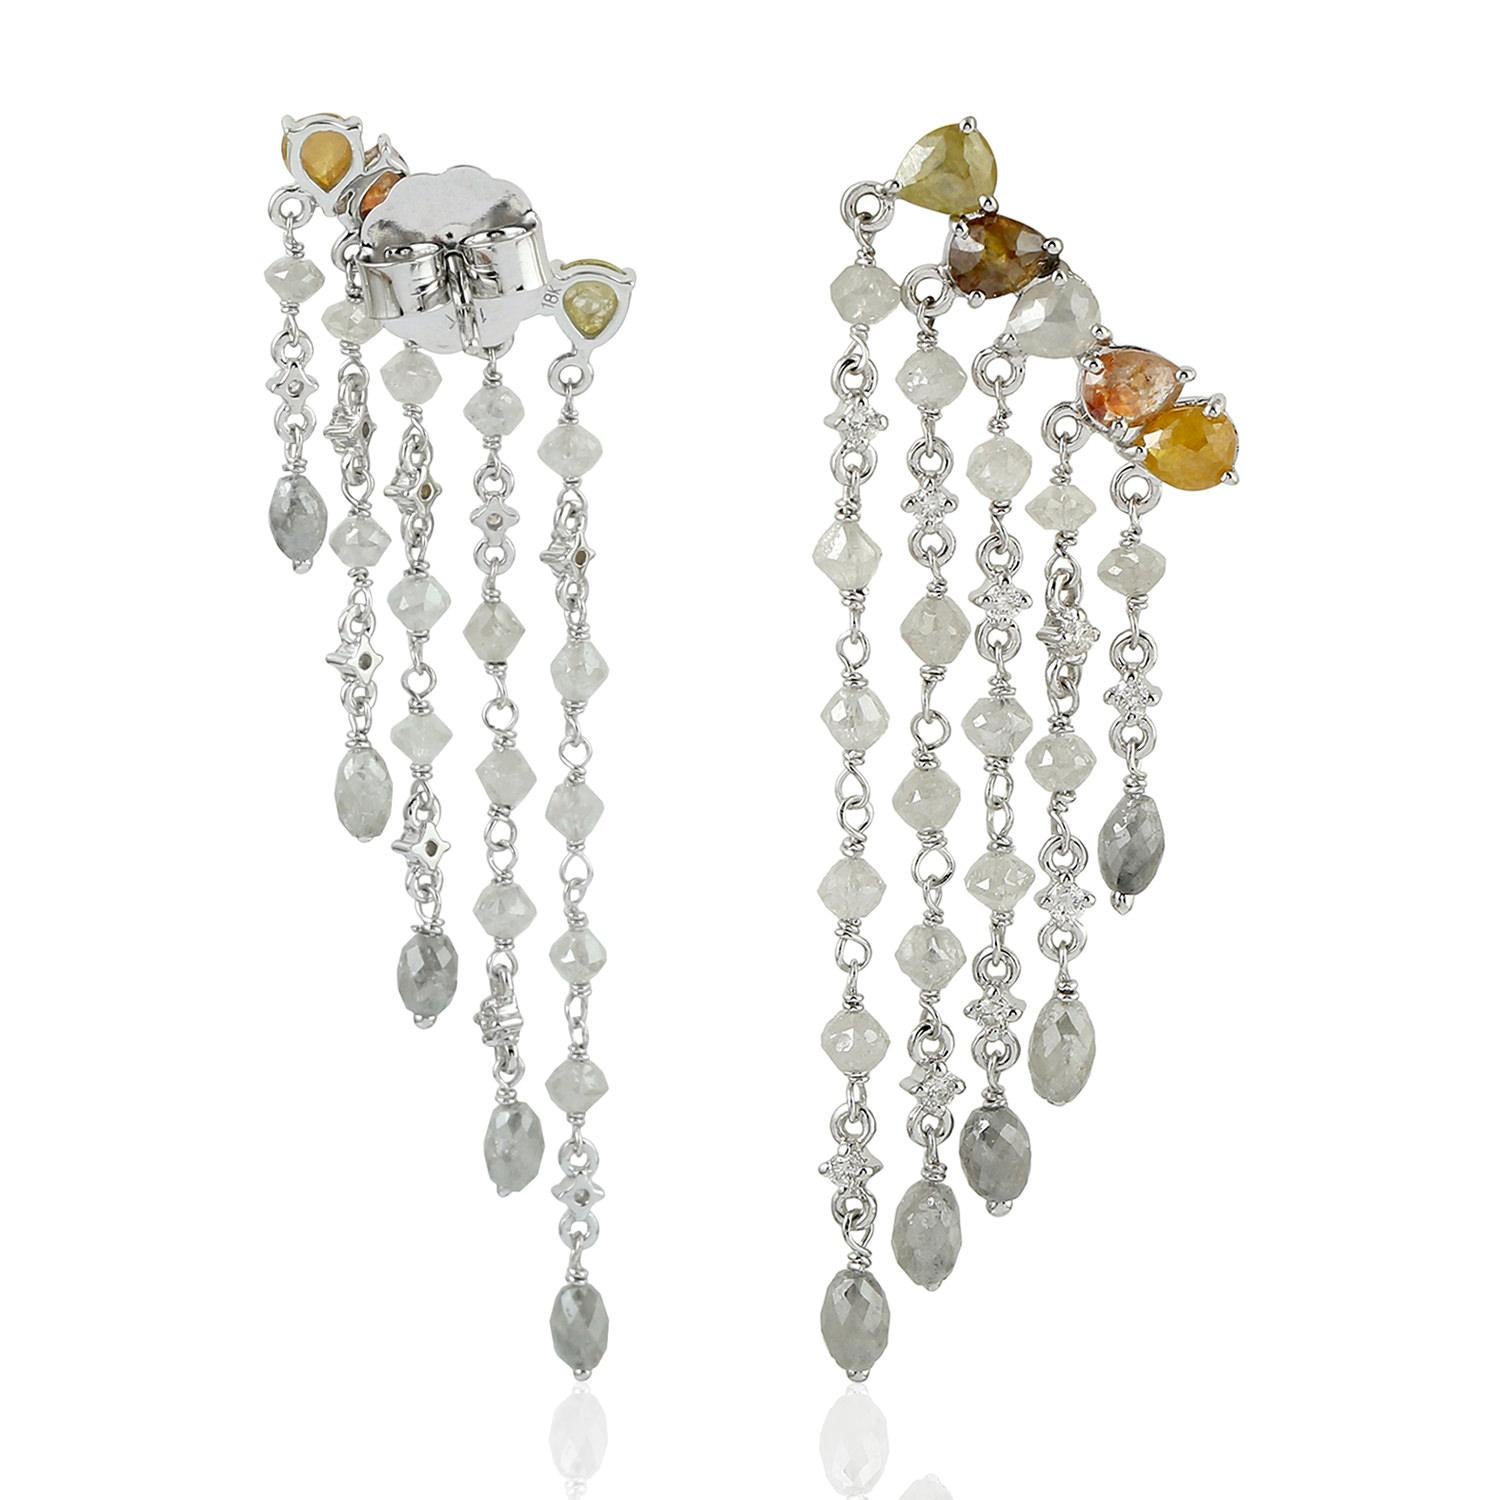 Mixed Cut ice Diamond Chandelier Earrings With Diamonds Made In 18k White Gold For Sale